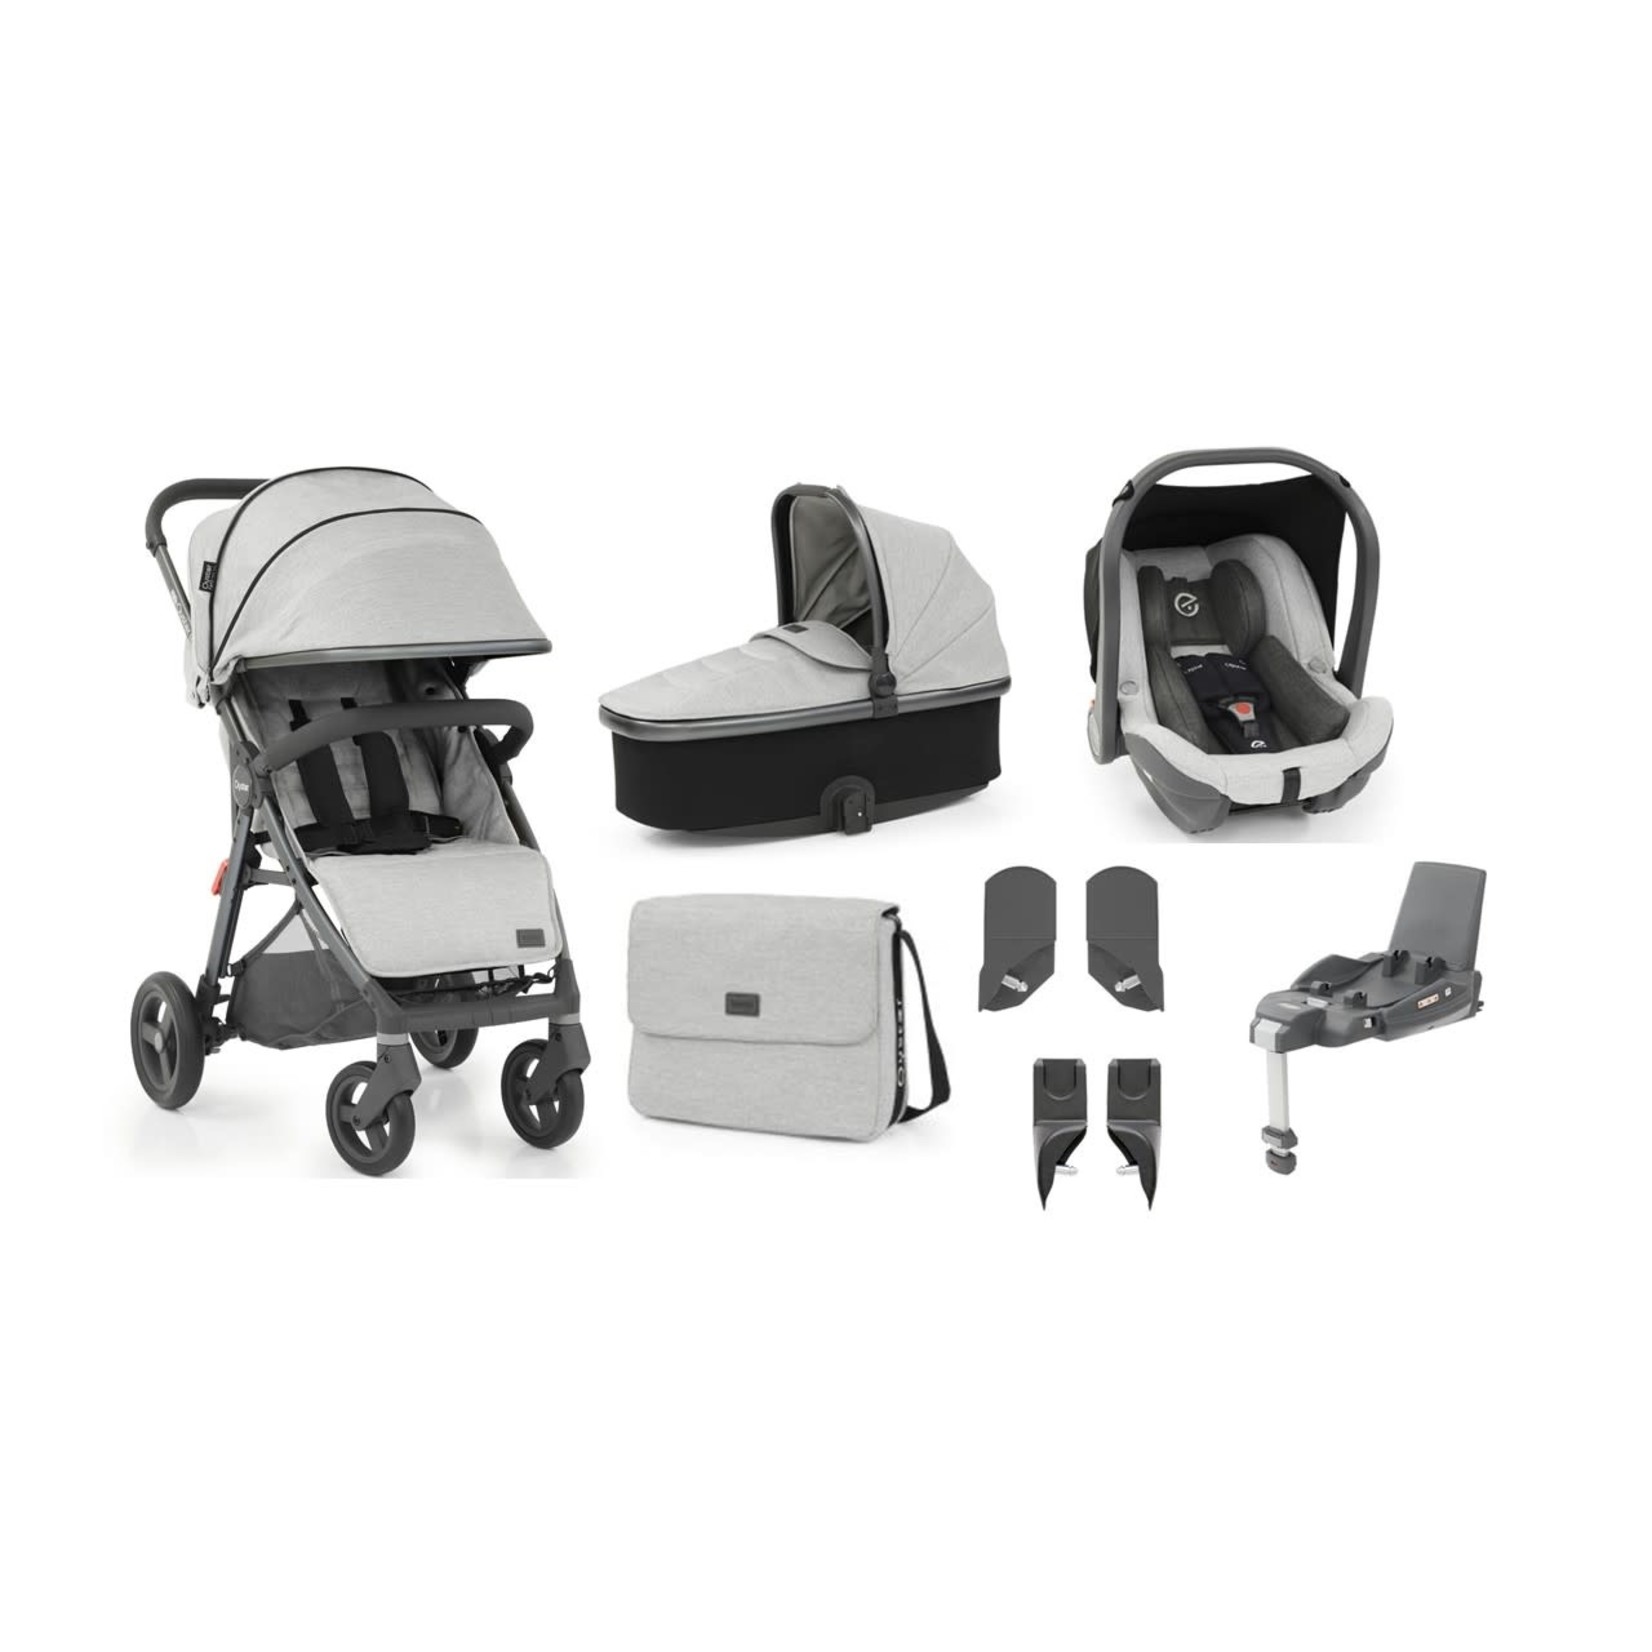 OYSTER BABYSTYLE OYSTER ZERO GRAVITY COMPLETE 3 IN 1 TRAVEL SYSTEM TONIC inc. IOSFIX